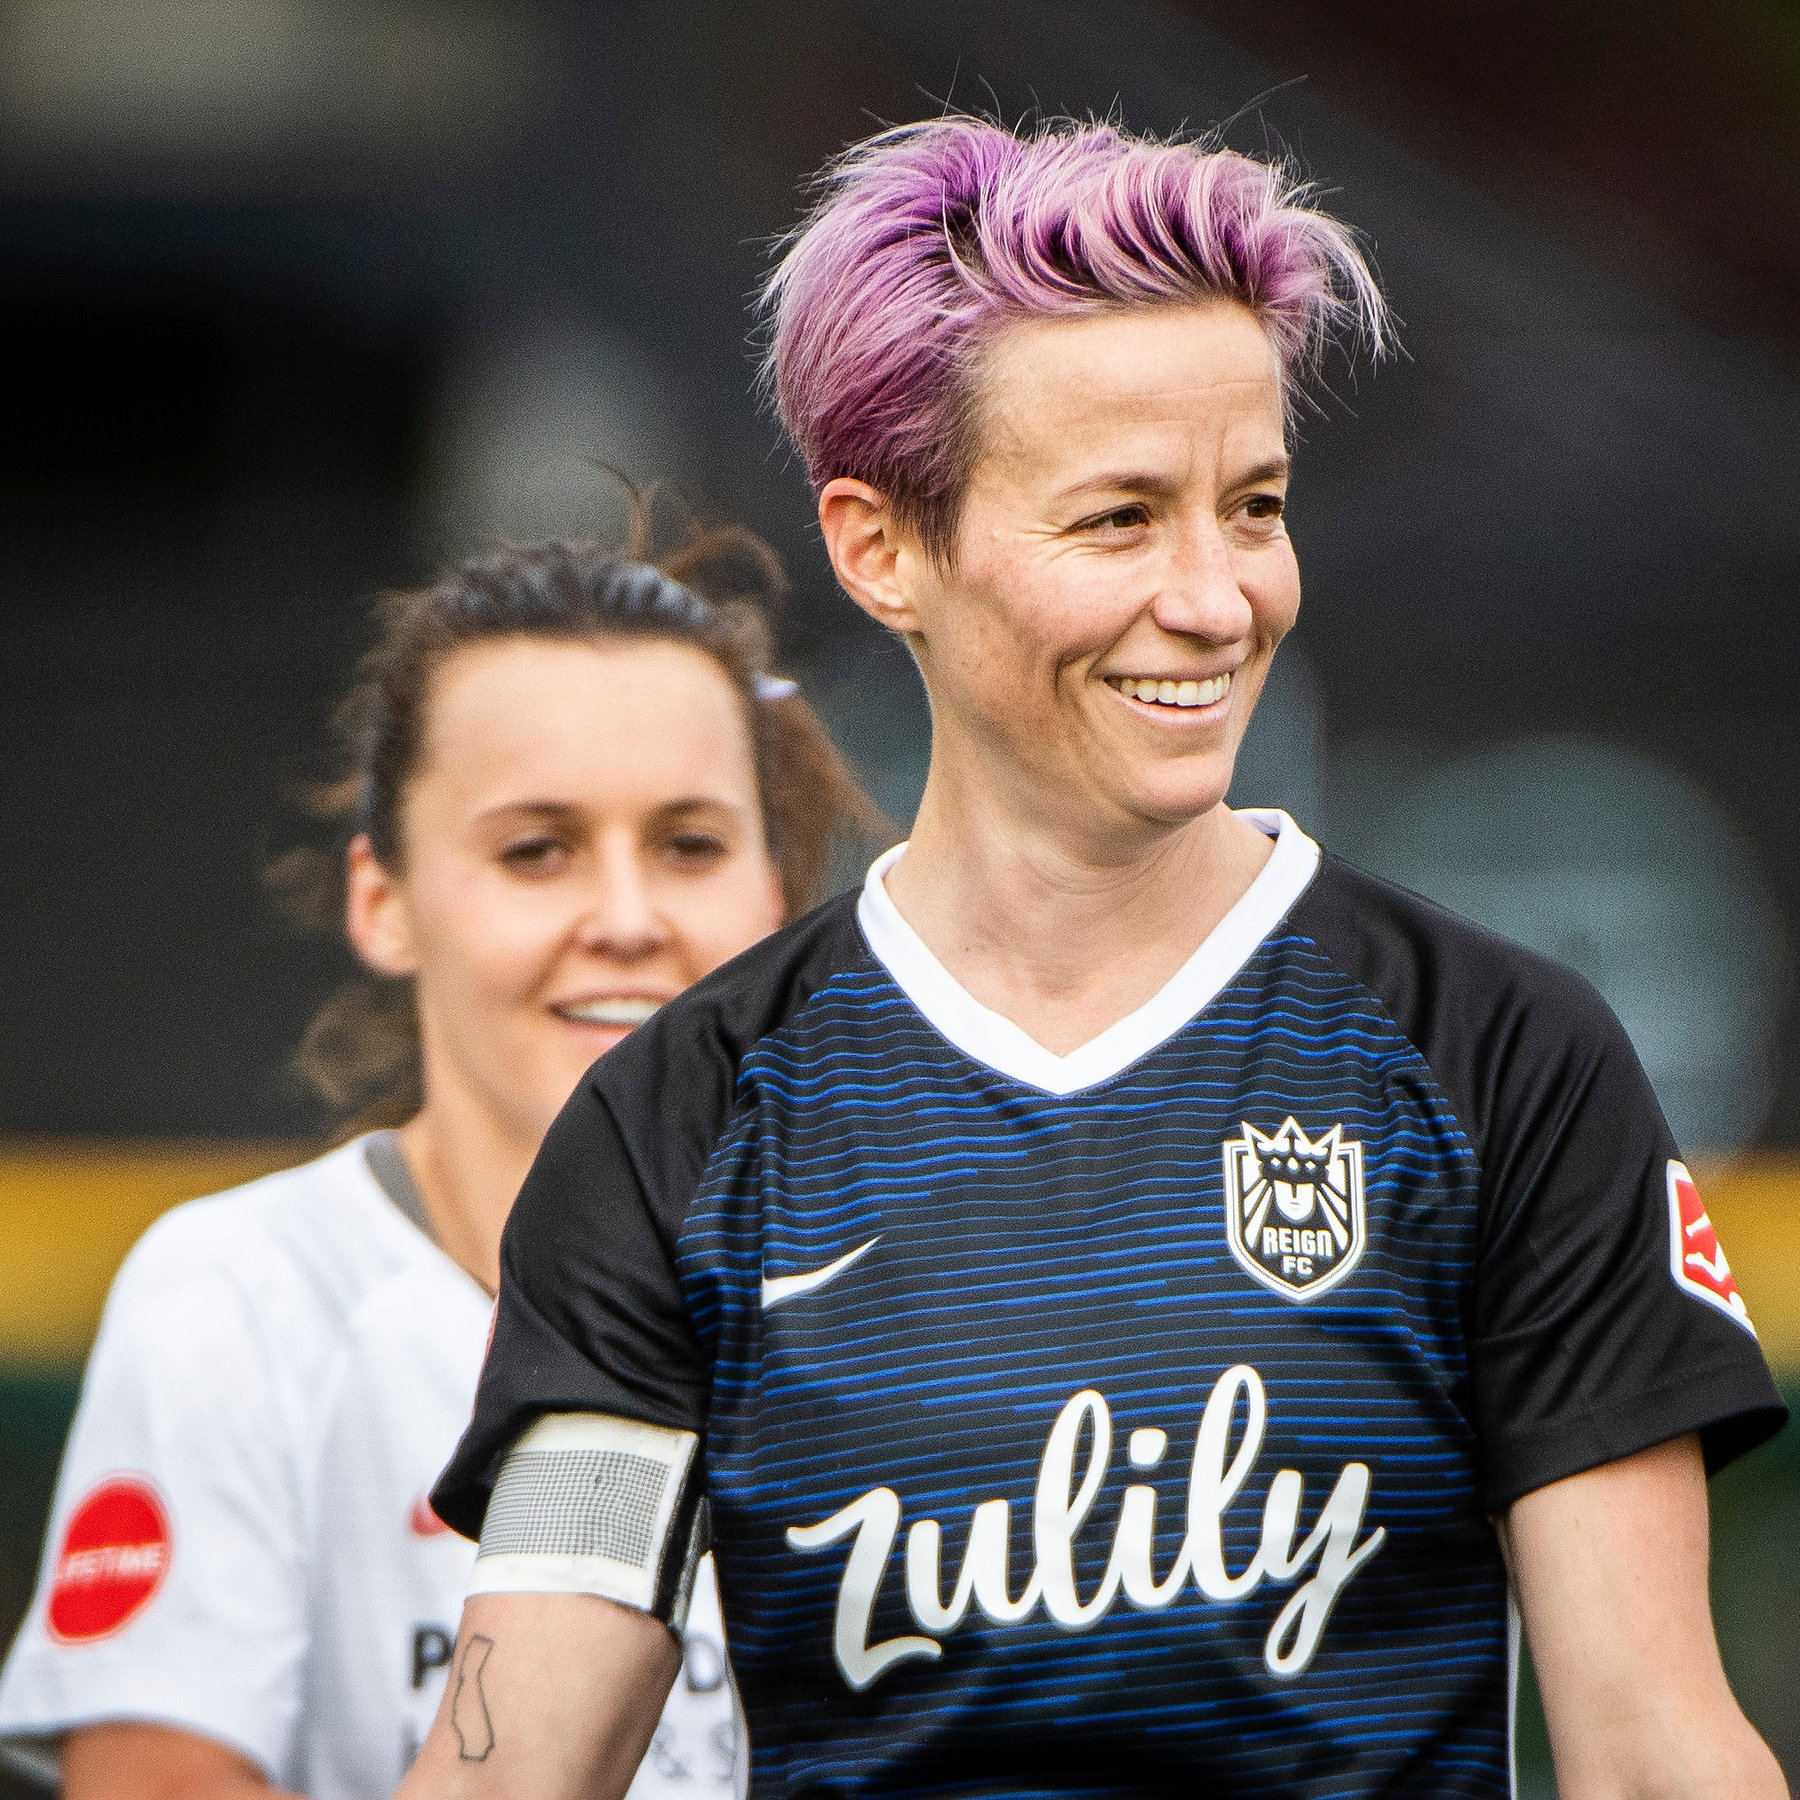 Which college did Megan Rapinoe attend?